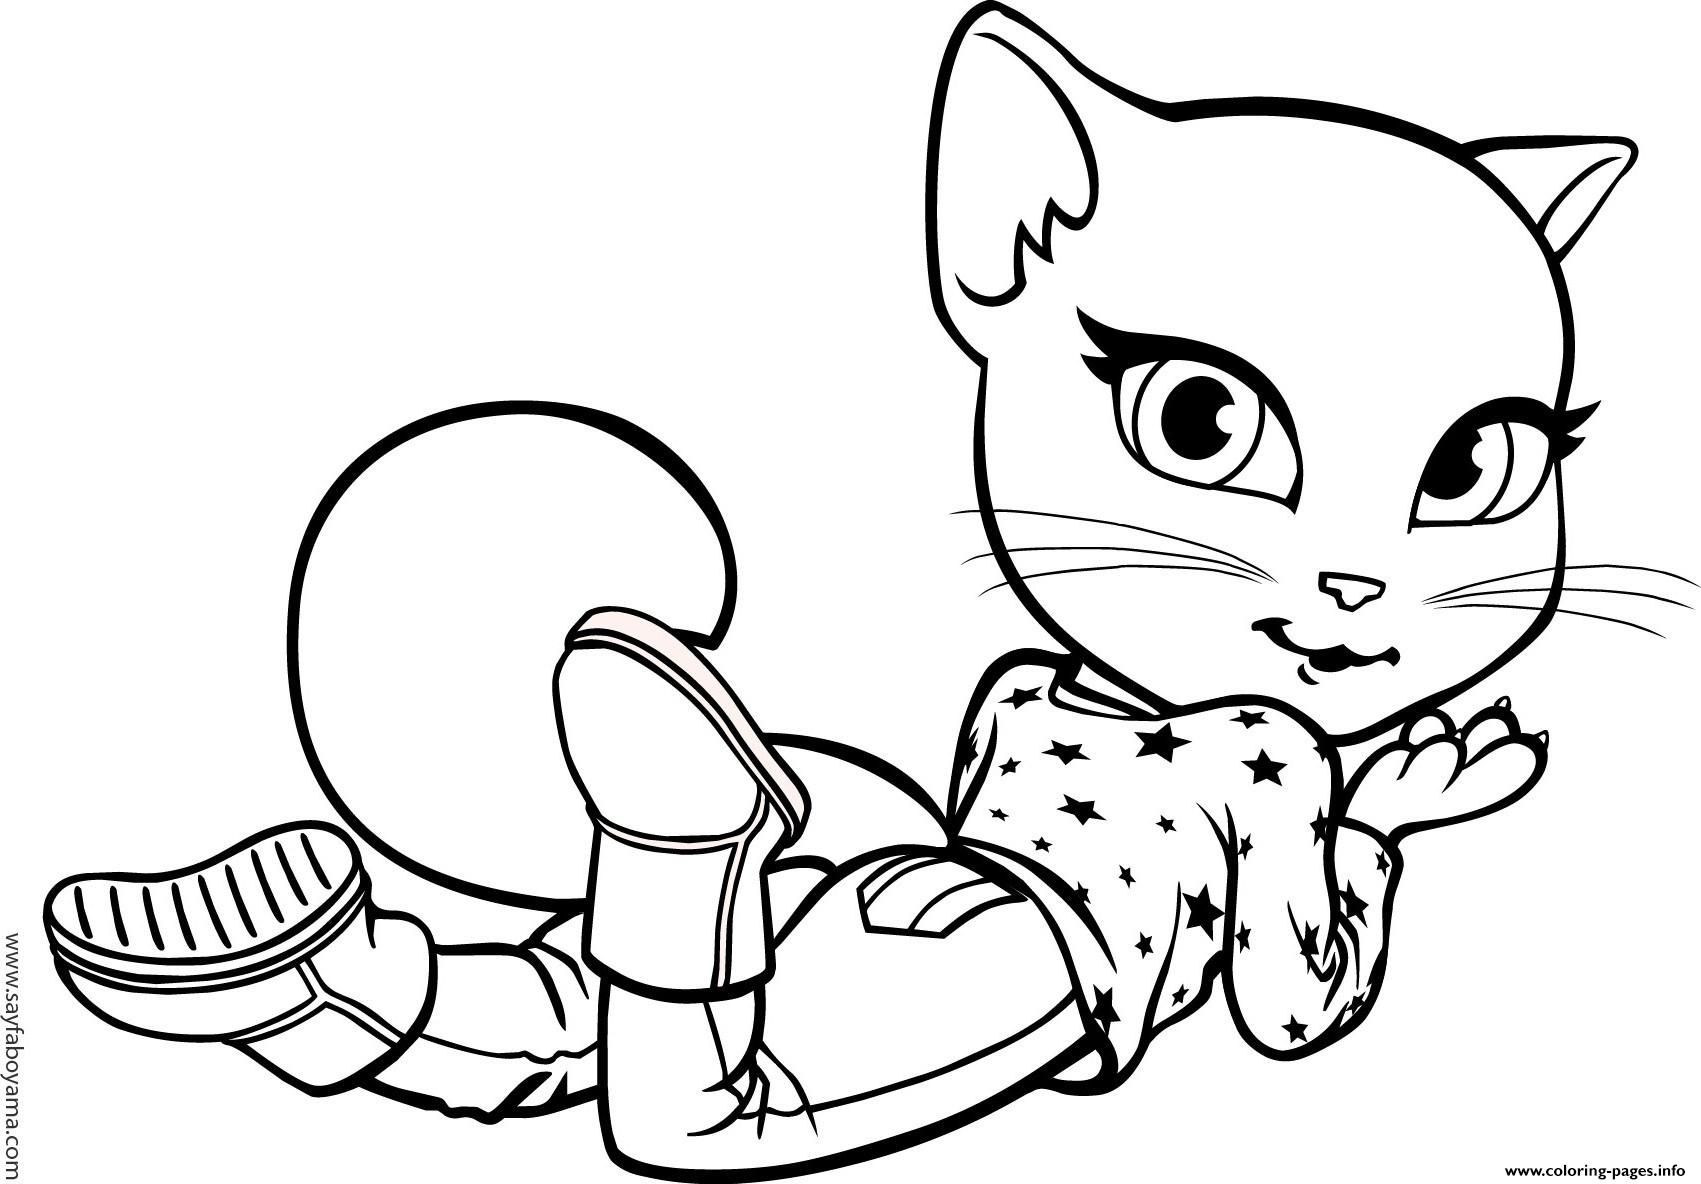 Angela Coloring Pages